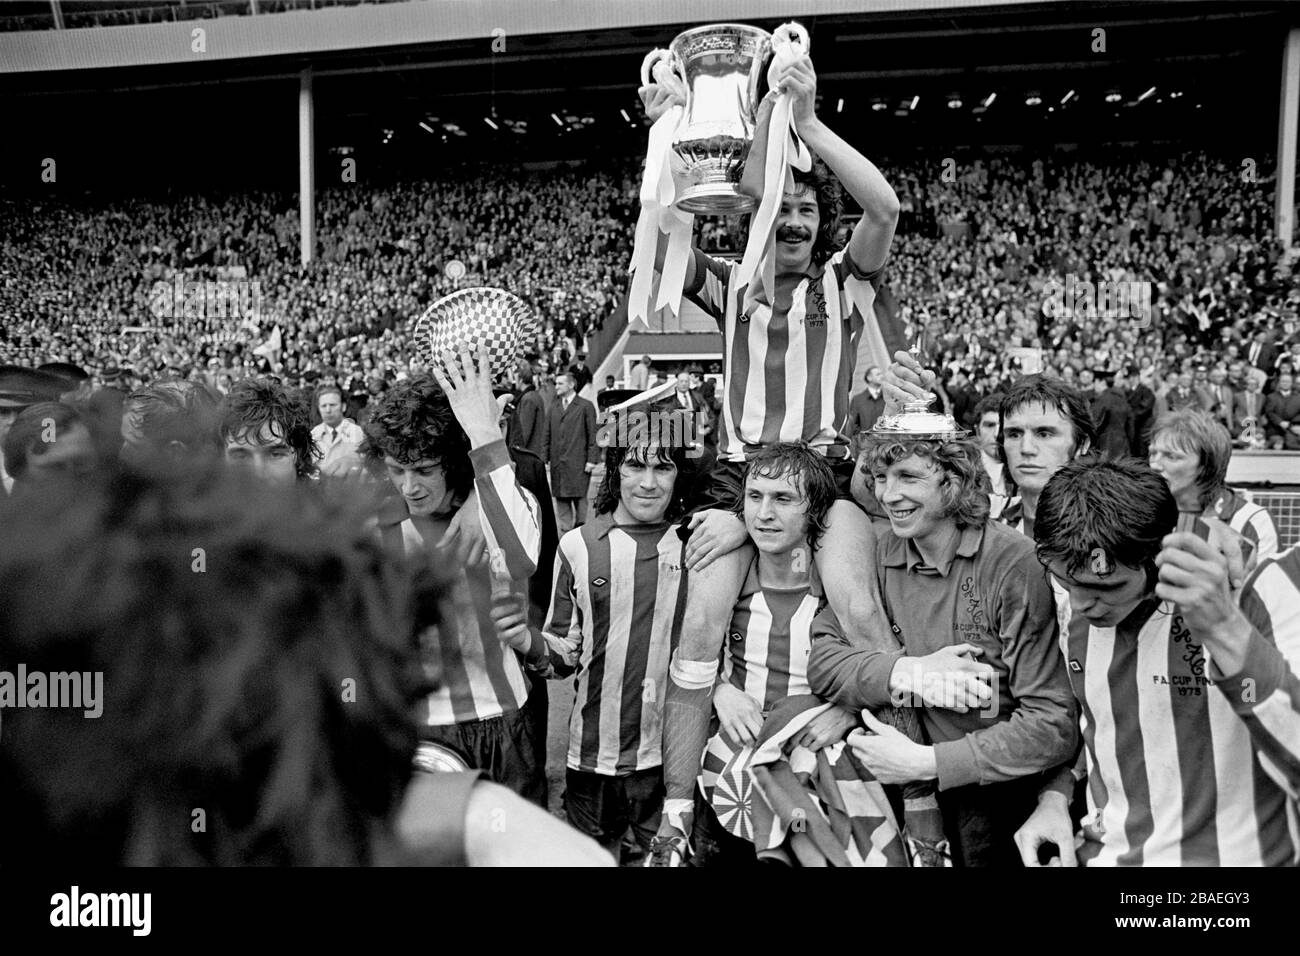 Sunderland captain Bobby Kerr (top) holds the FA Cup aloft after his team's 1-0 victory, supported by teammates (l-r) Billy Hughes, Dennis Tueart and goalkeeper Jim Montgomery Stock Photo